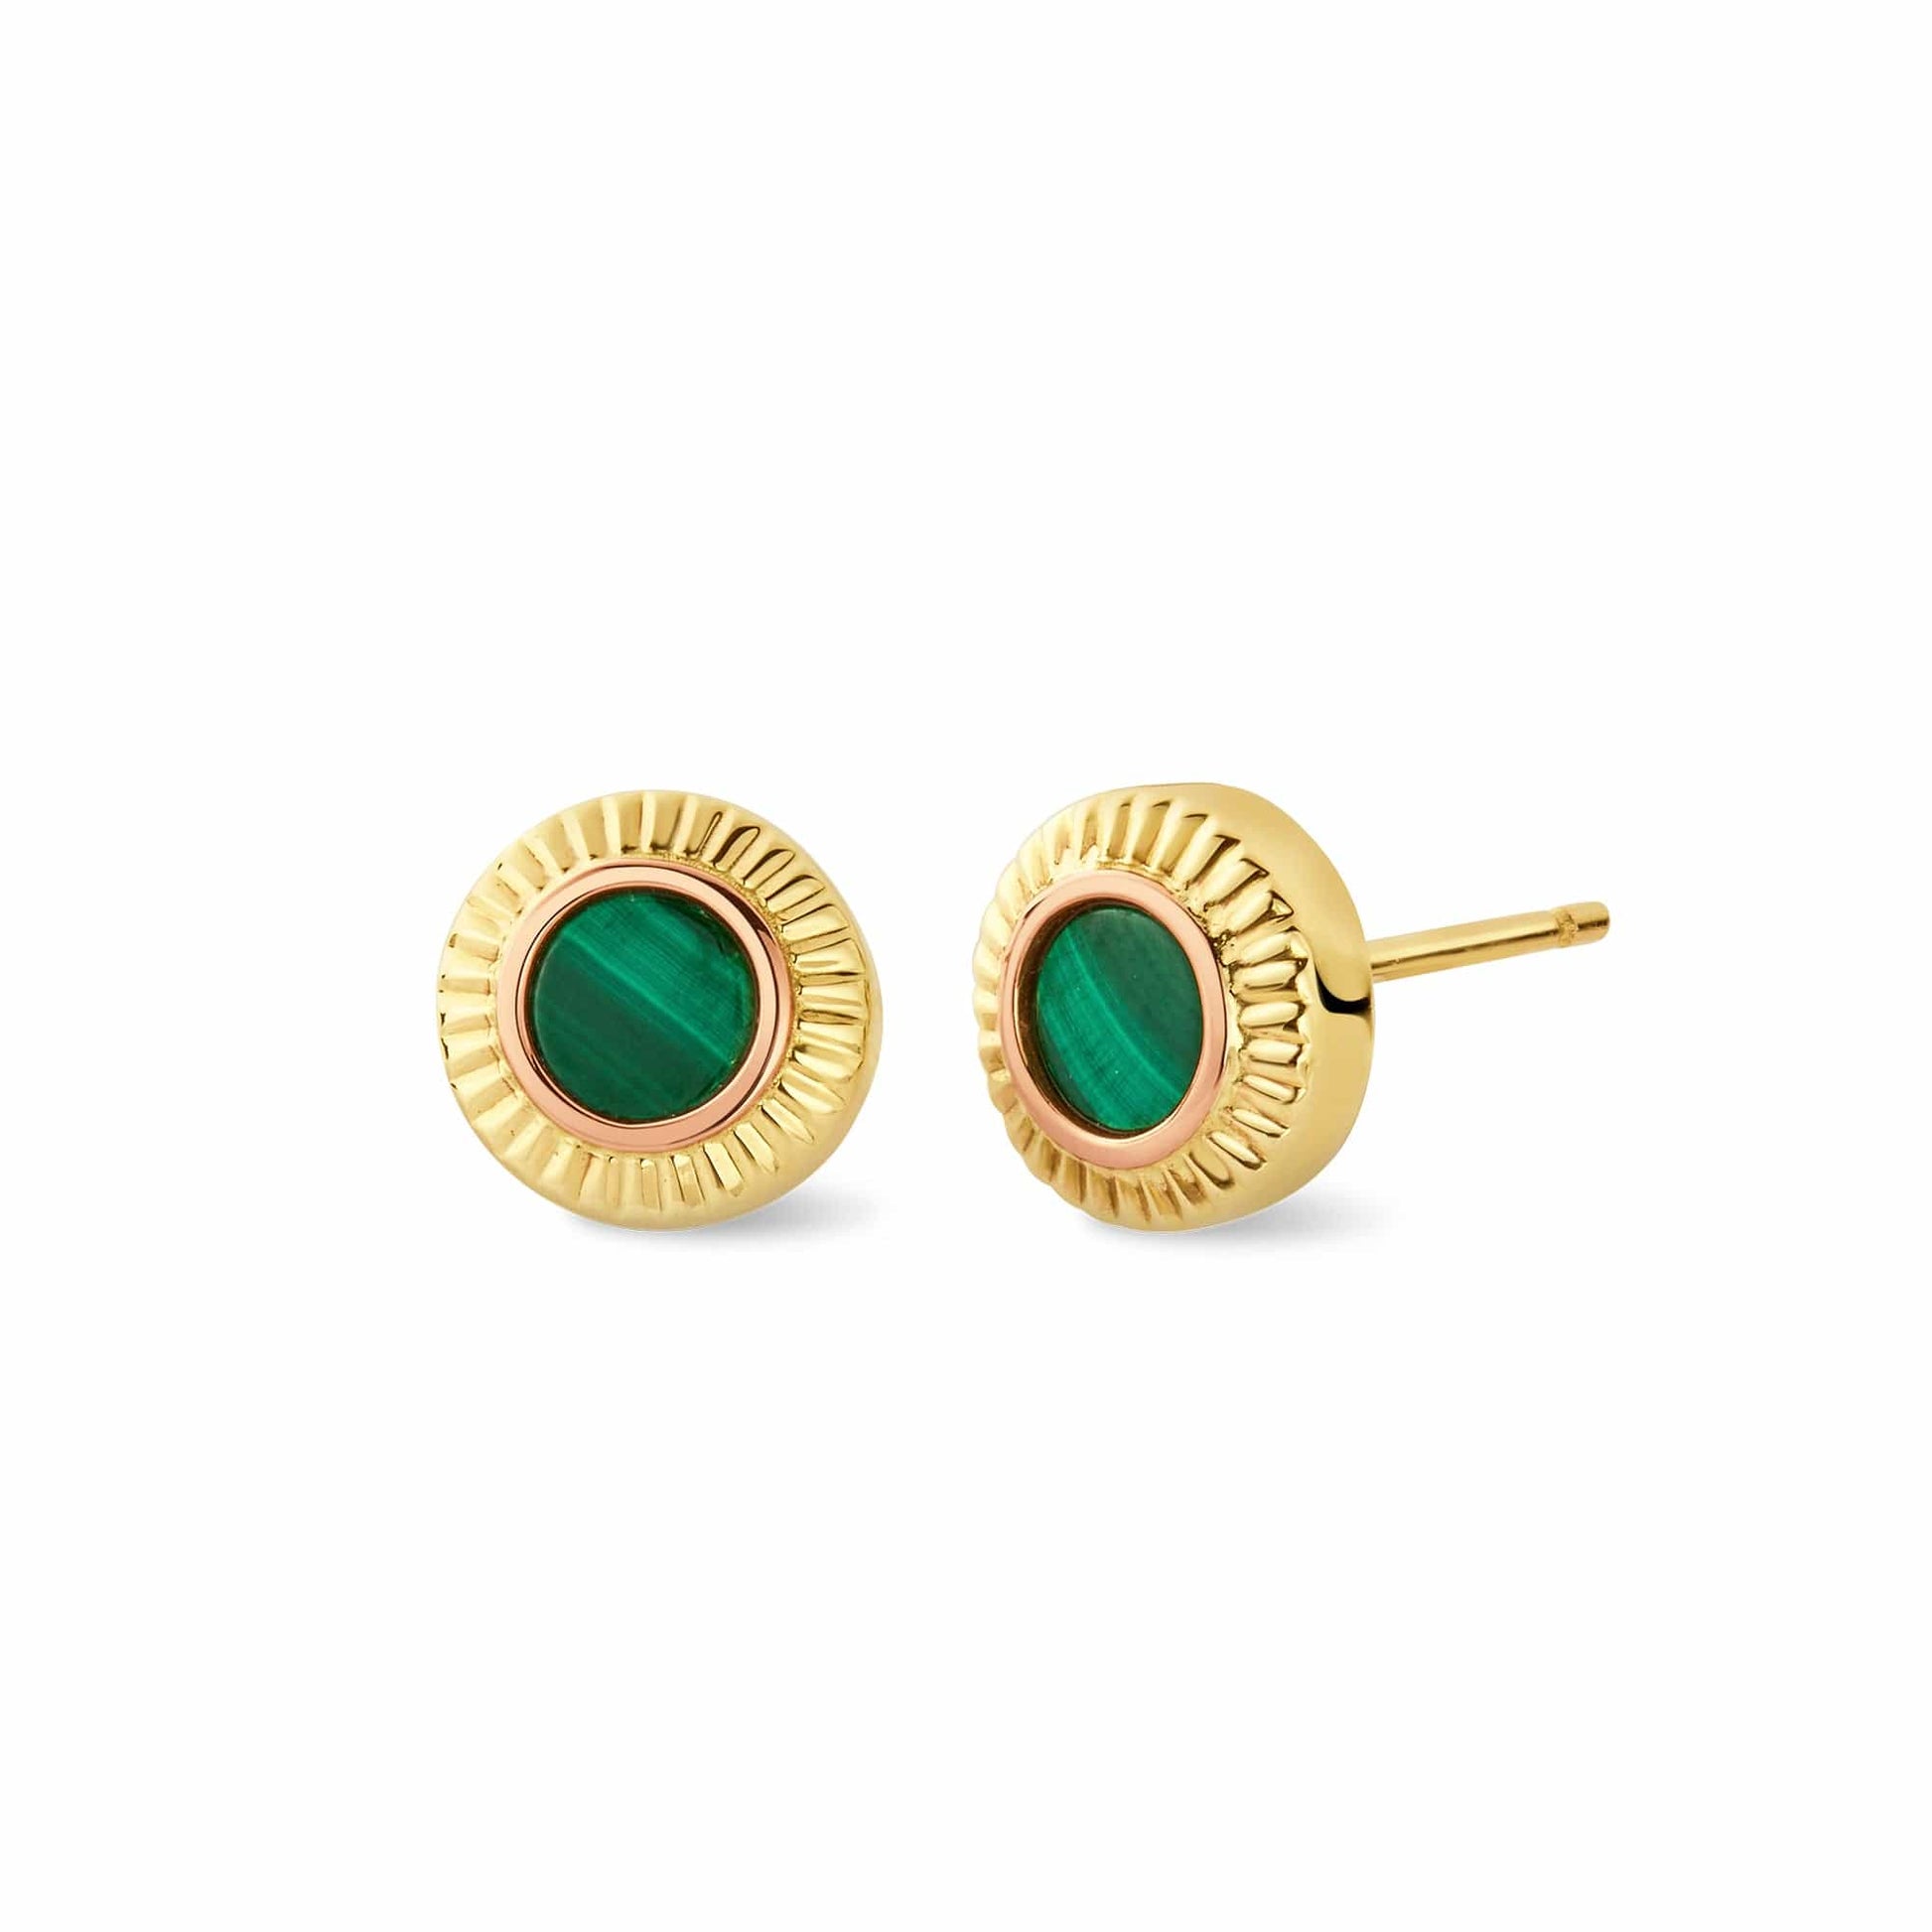 Reflections of Padarn Gold and Malachite Stud Earrings